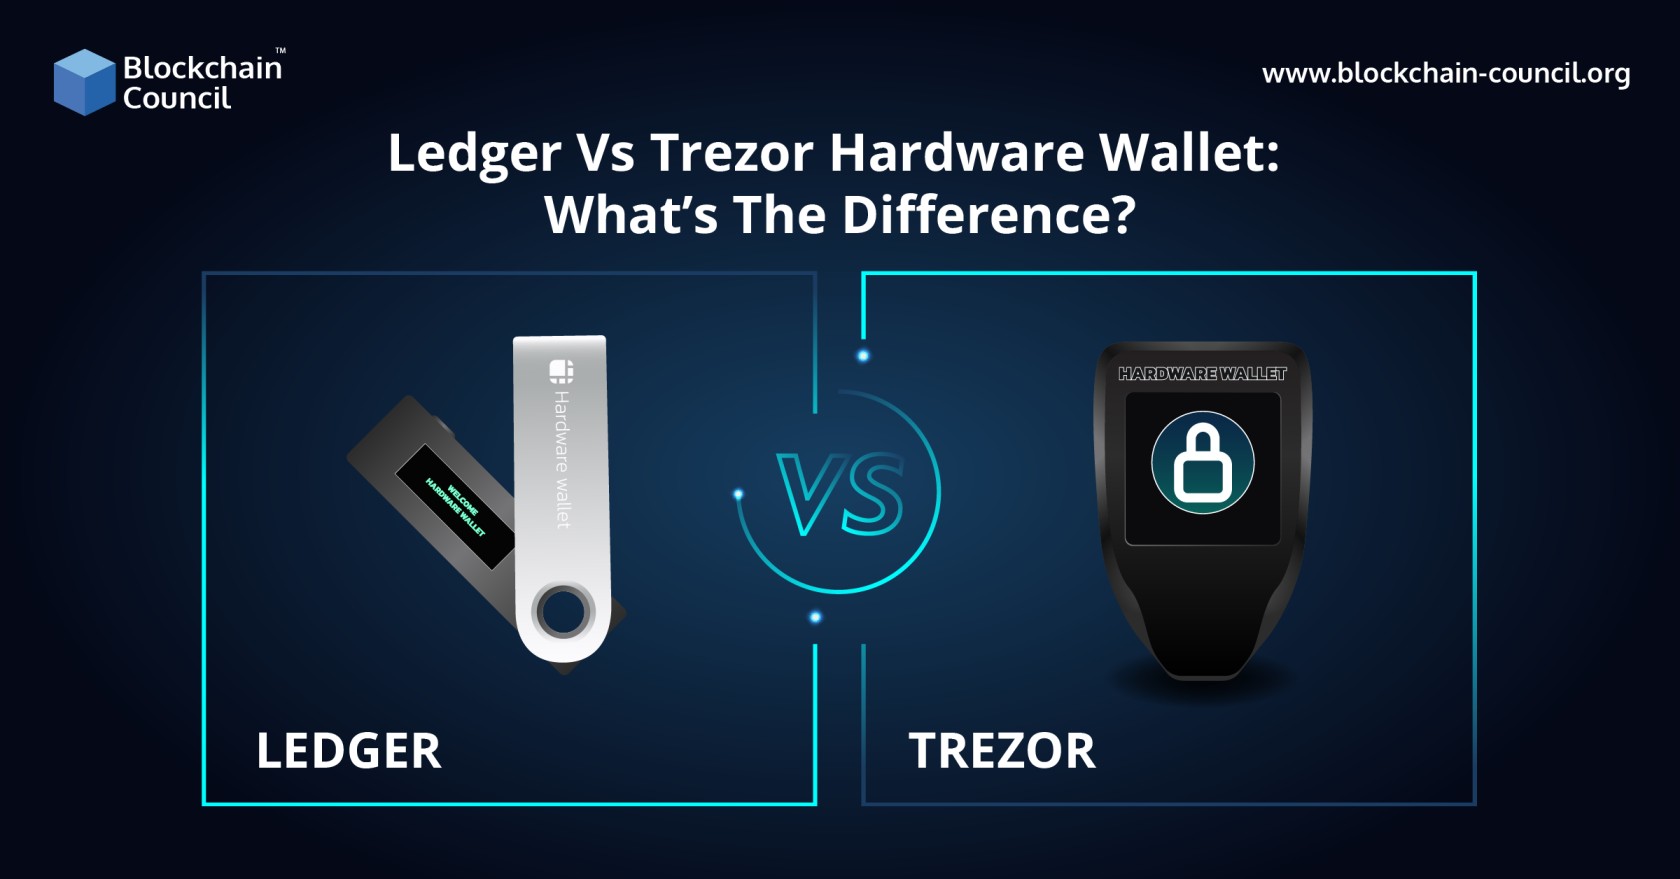 Ledger vs Trezor Hardware Wallet: What's The Difference